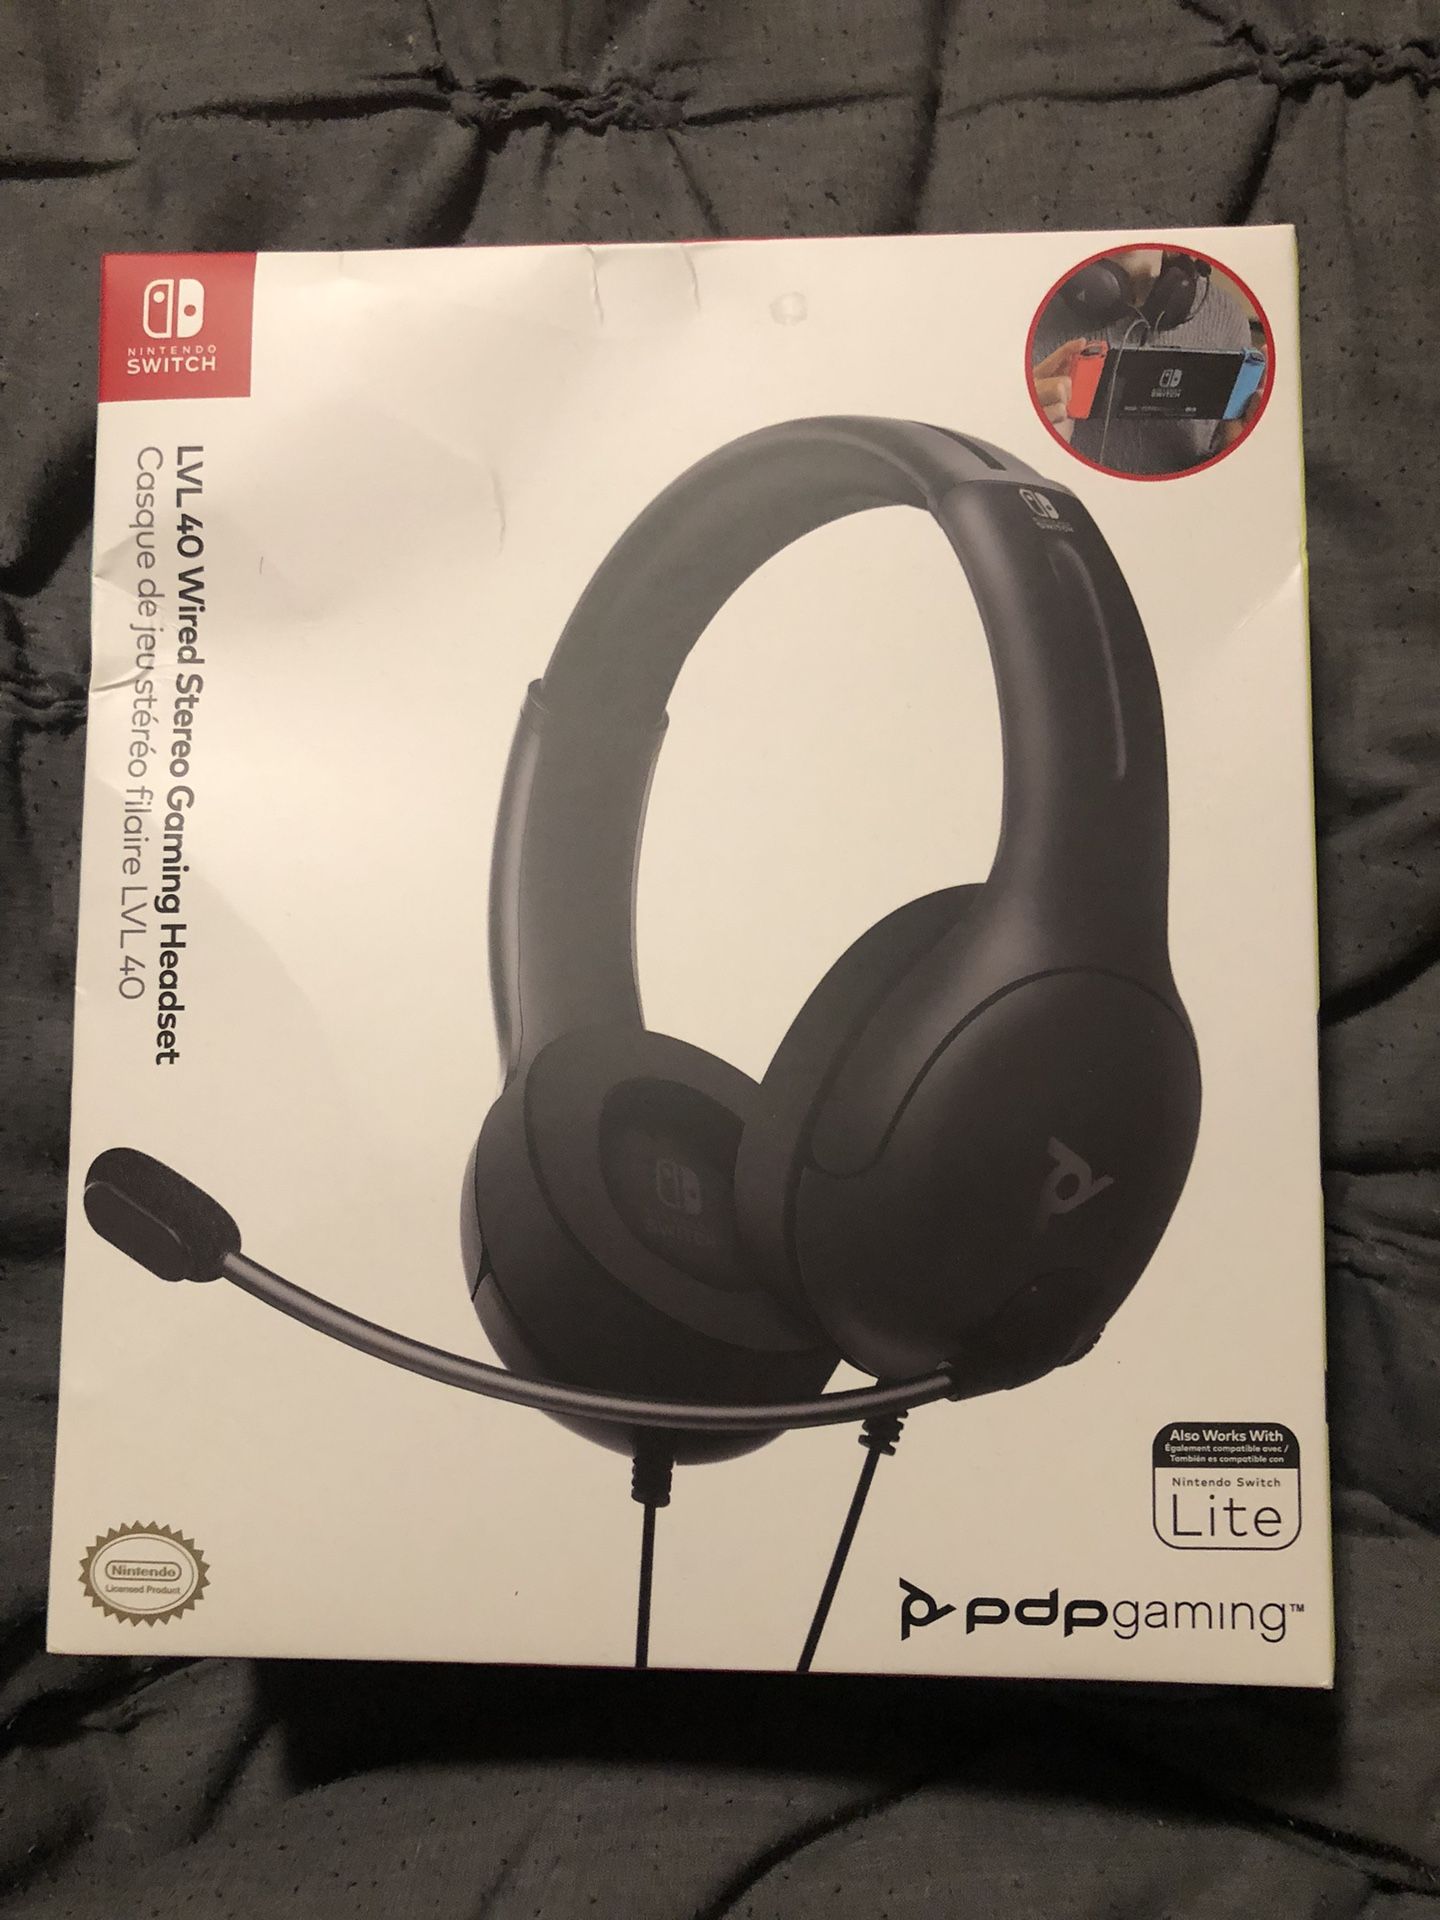 BRAND NEW IN BOX still factory sealed - PDP Gaming LVL40 Wired Stereo Gaming Headset for Nintendo Switch Or Any USB